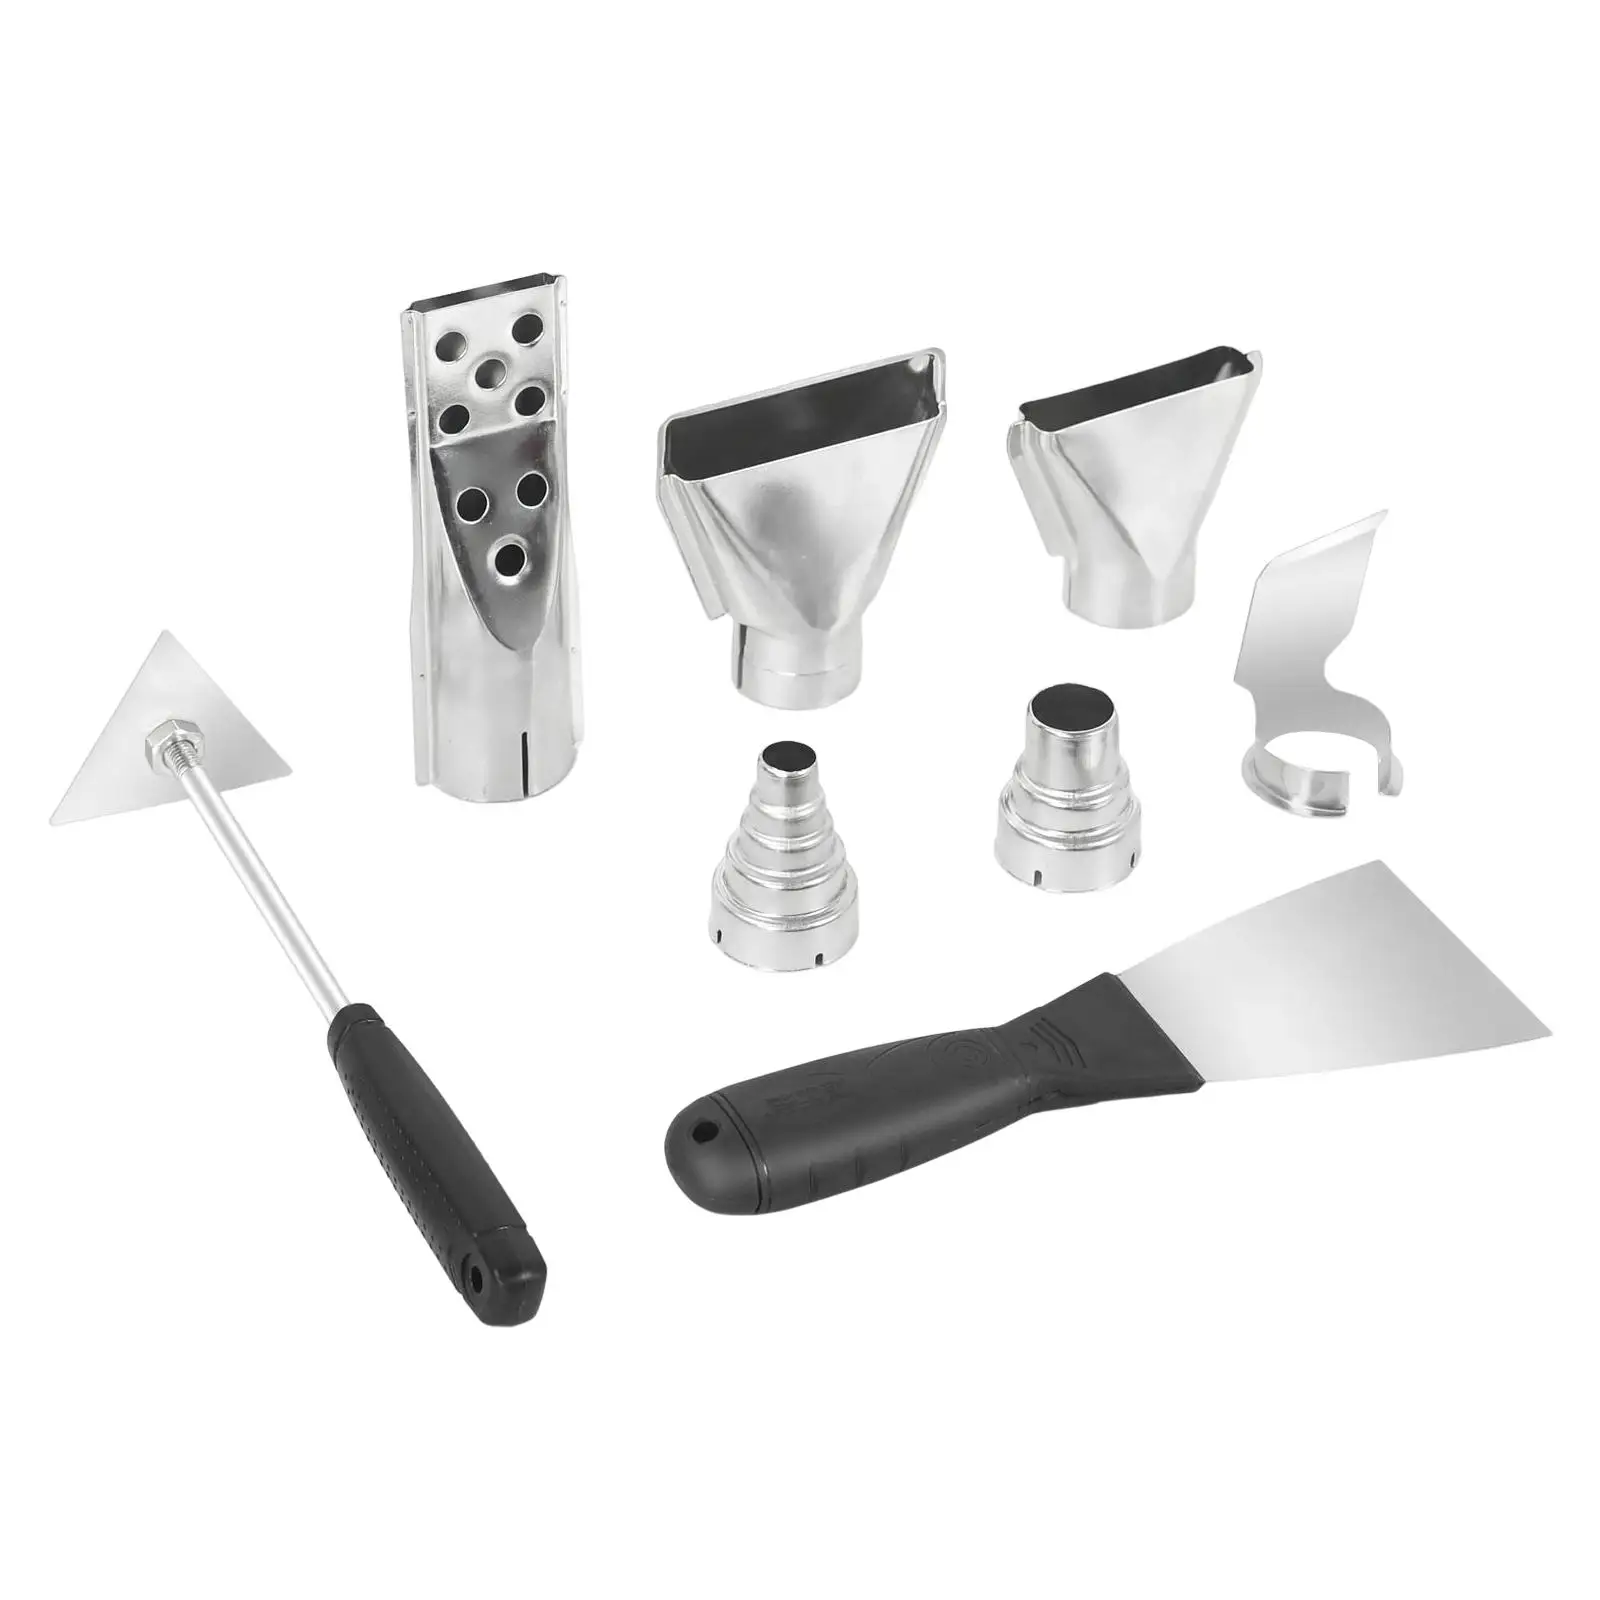 8 Pieces Stainless Steel Heat Nozzles Kit for Hot Air Station